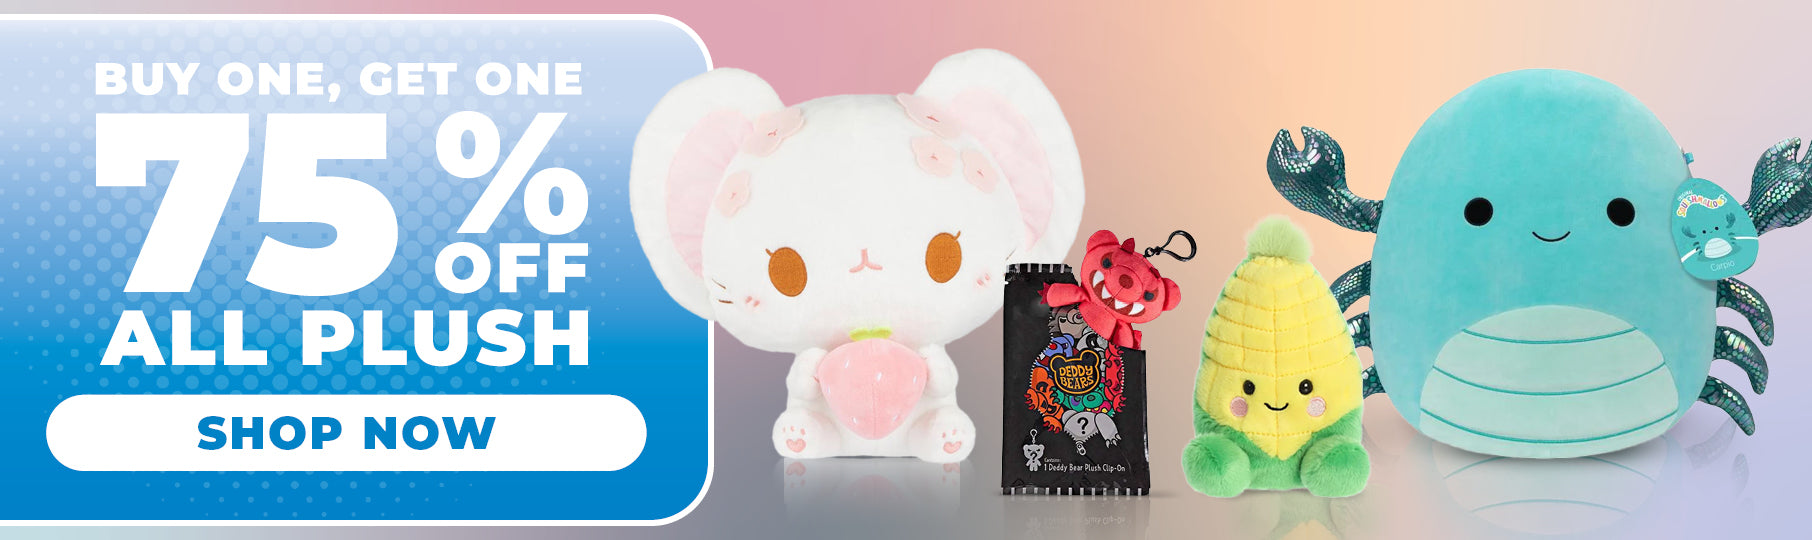 Buy One Get One 75% Off Plush - Shop Now!